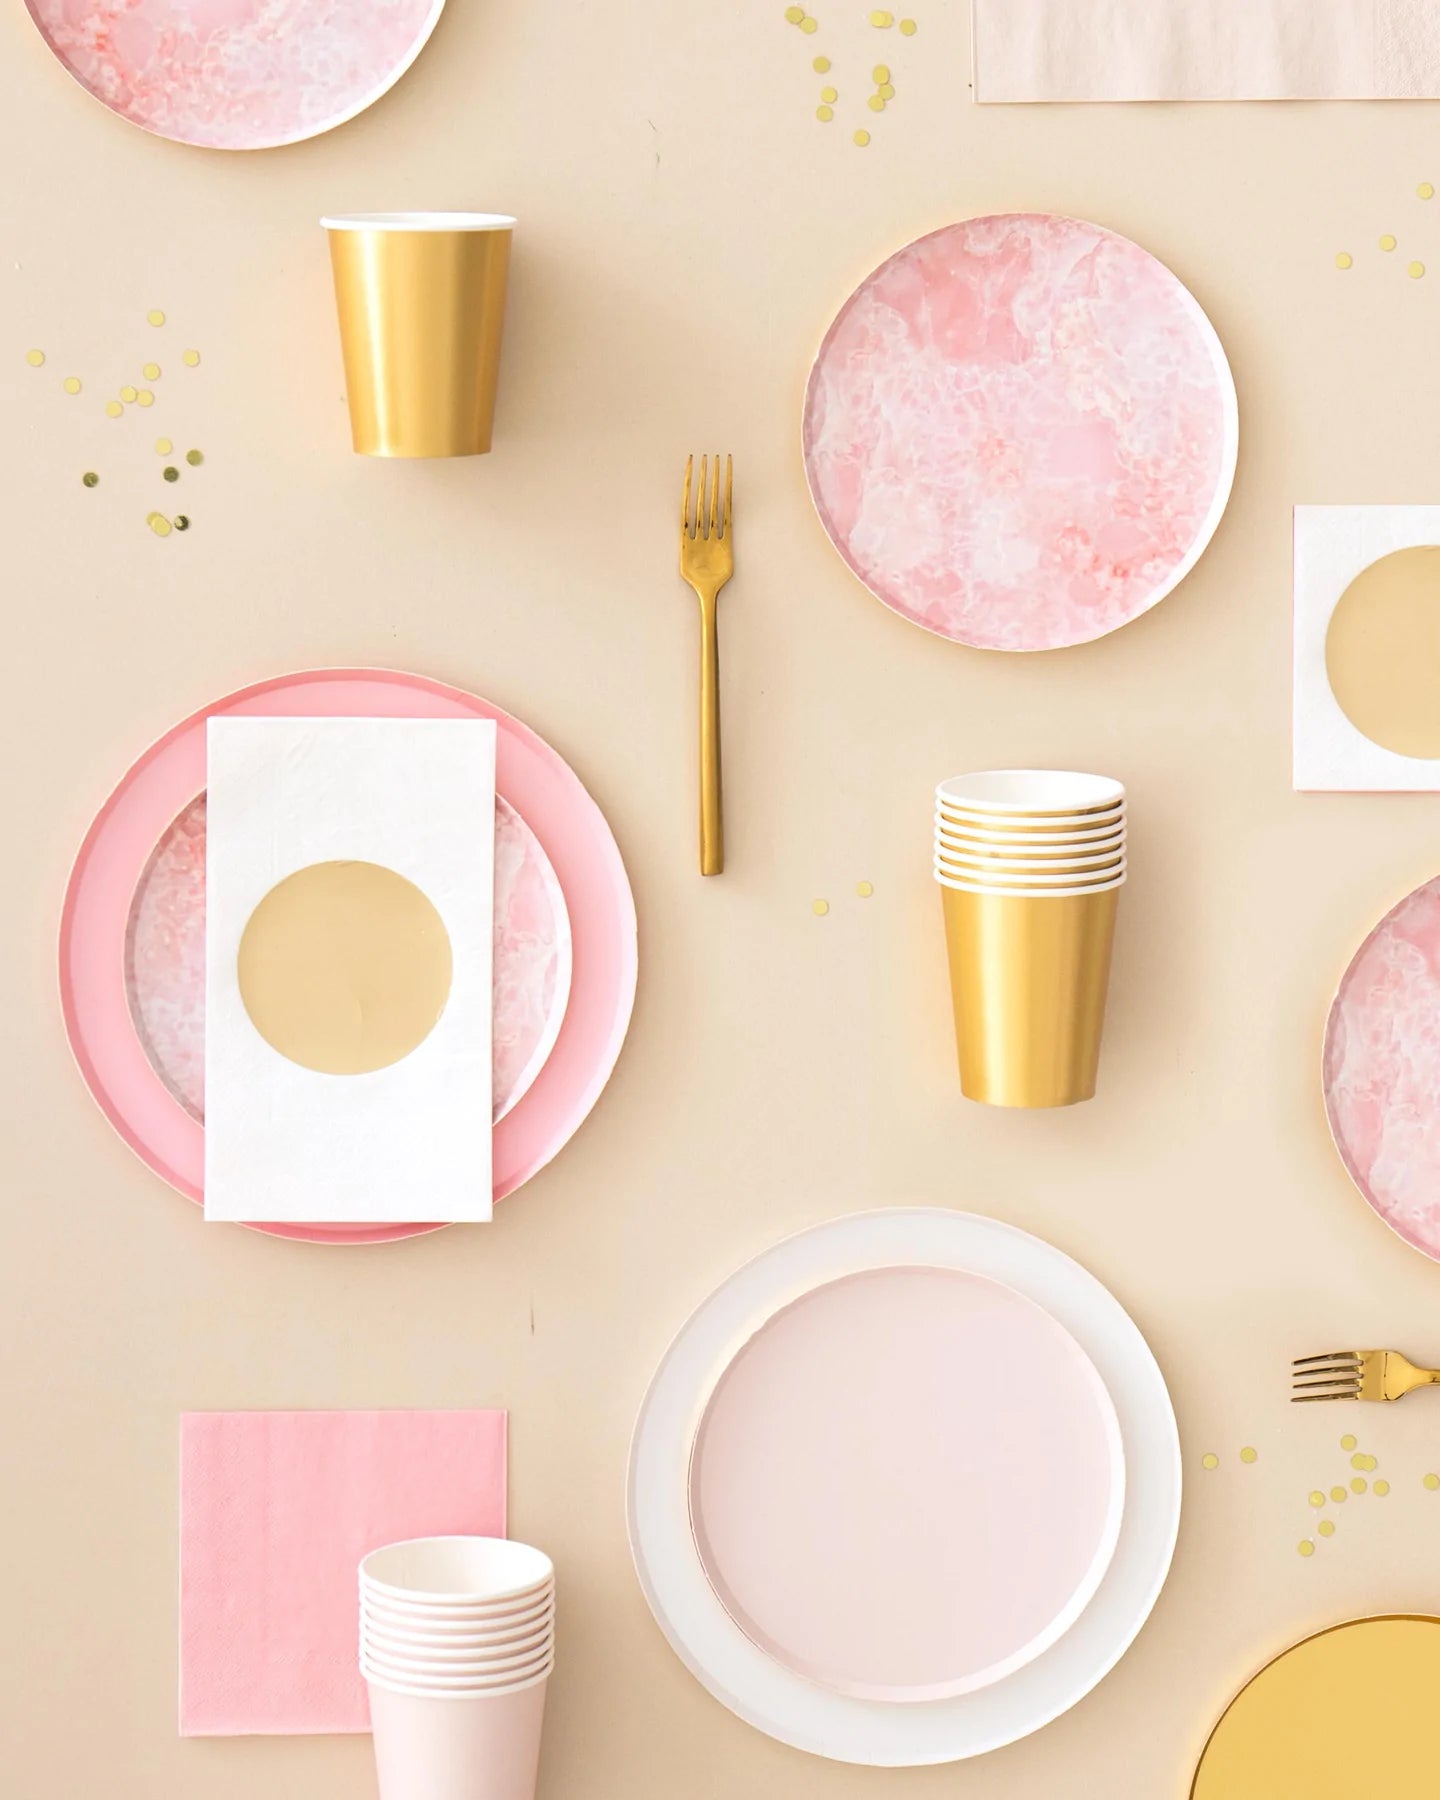 OH HAPPY DAY PRETTY IN PINK DINNER PLATES